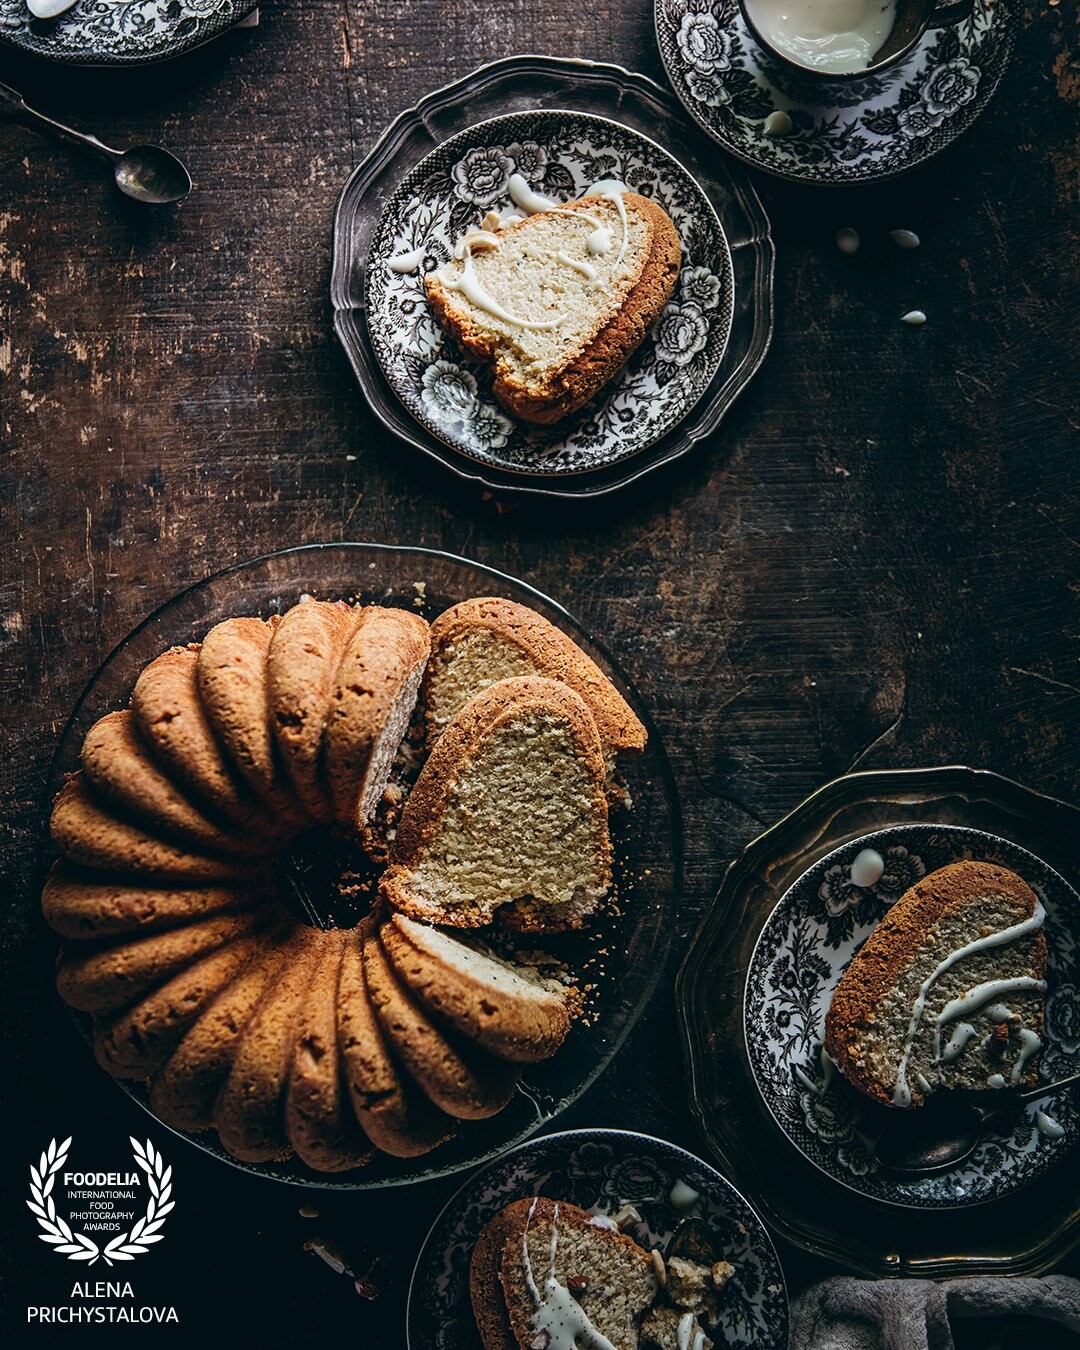 There's nothing better than a piece of bundt cake, a cup of coffee and chatting with friends. Behind every photo, there is a story and behind this one, there is a story of a workshop in Finland and its last day when we photographed the cardamom bundt cake.